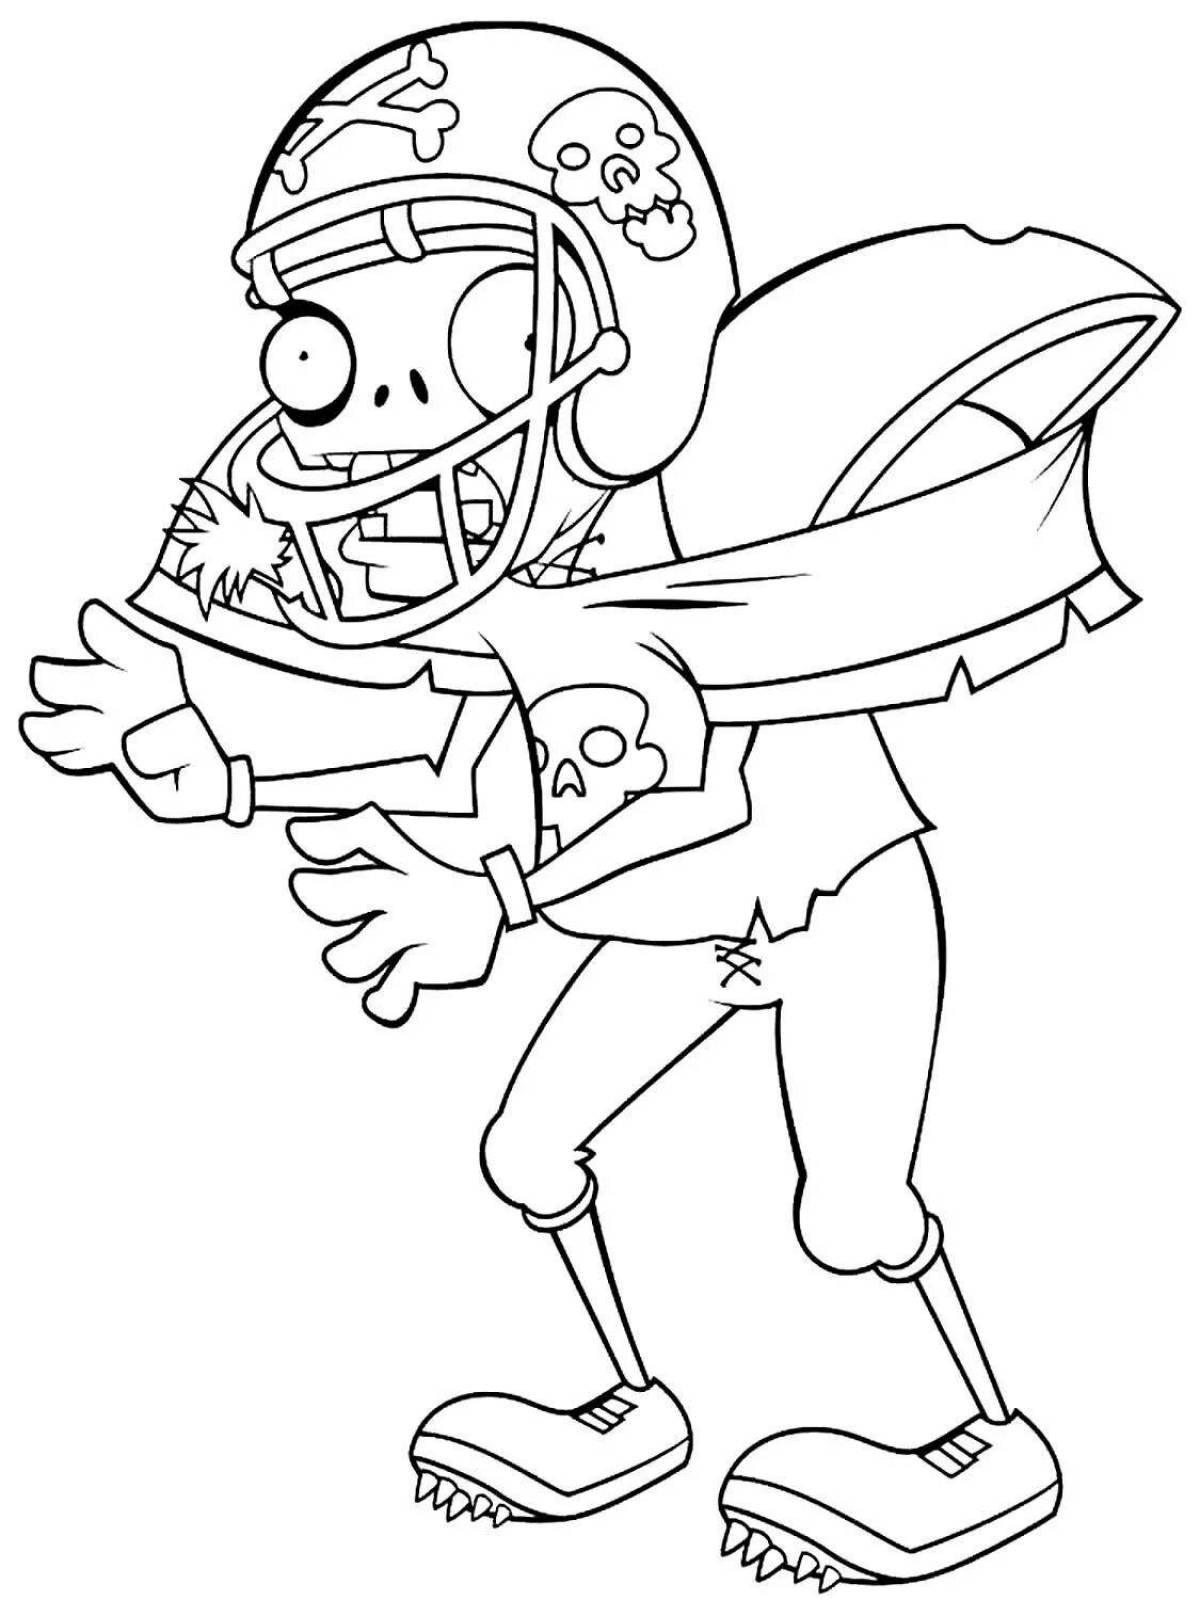 Coloring Page of Horrible Zombie Sketchers